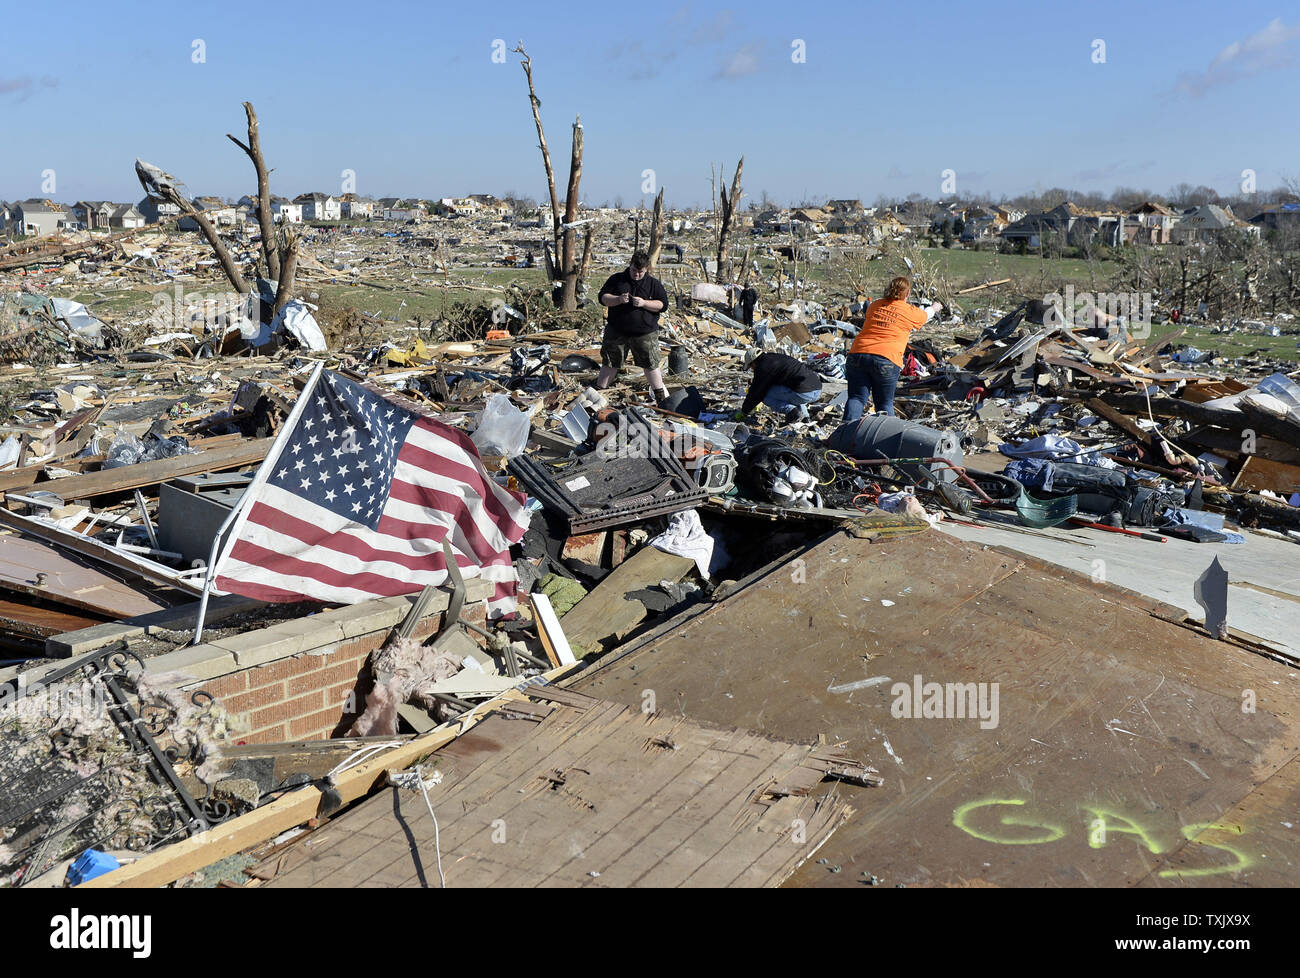 Residents sort through the rubble after their home was destroyed in Washington, Illinois on November 18, 2013. Six people died and hundreds of homes were destroyed in Illinois as 81 tornadoes were sighted on November 17 throughout 12 midwest states including the EF4 tornado that struck Washington, Illinois.     UPI/Brian Kersey.     UPI/Brian Kersey Stock Photo